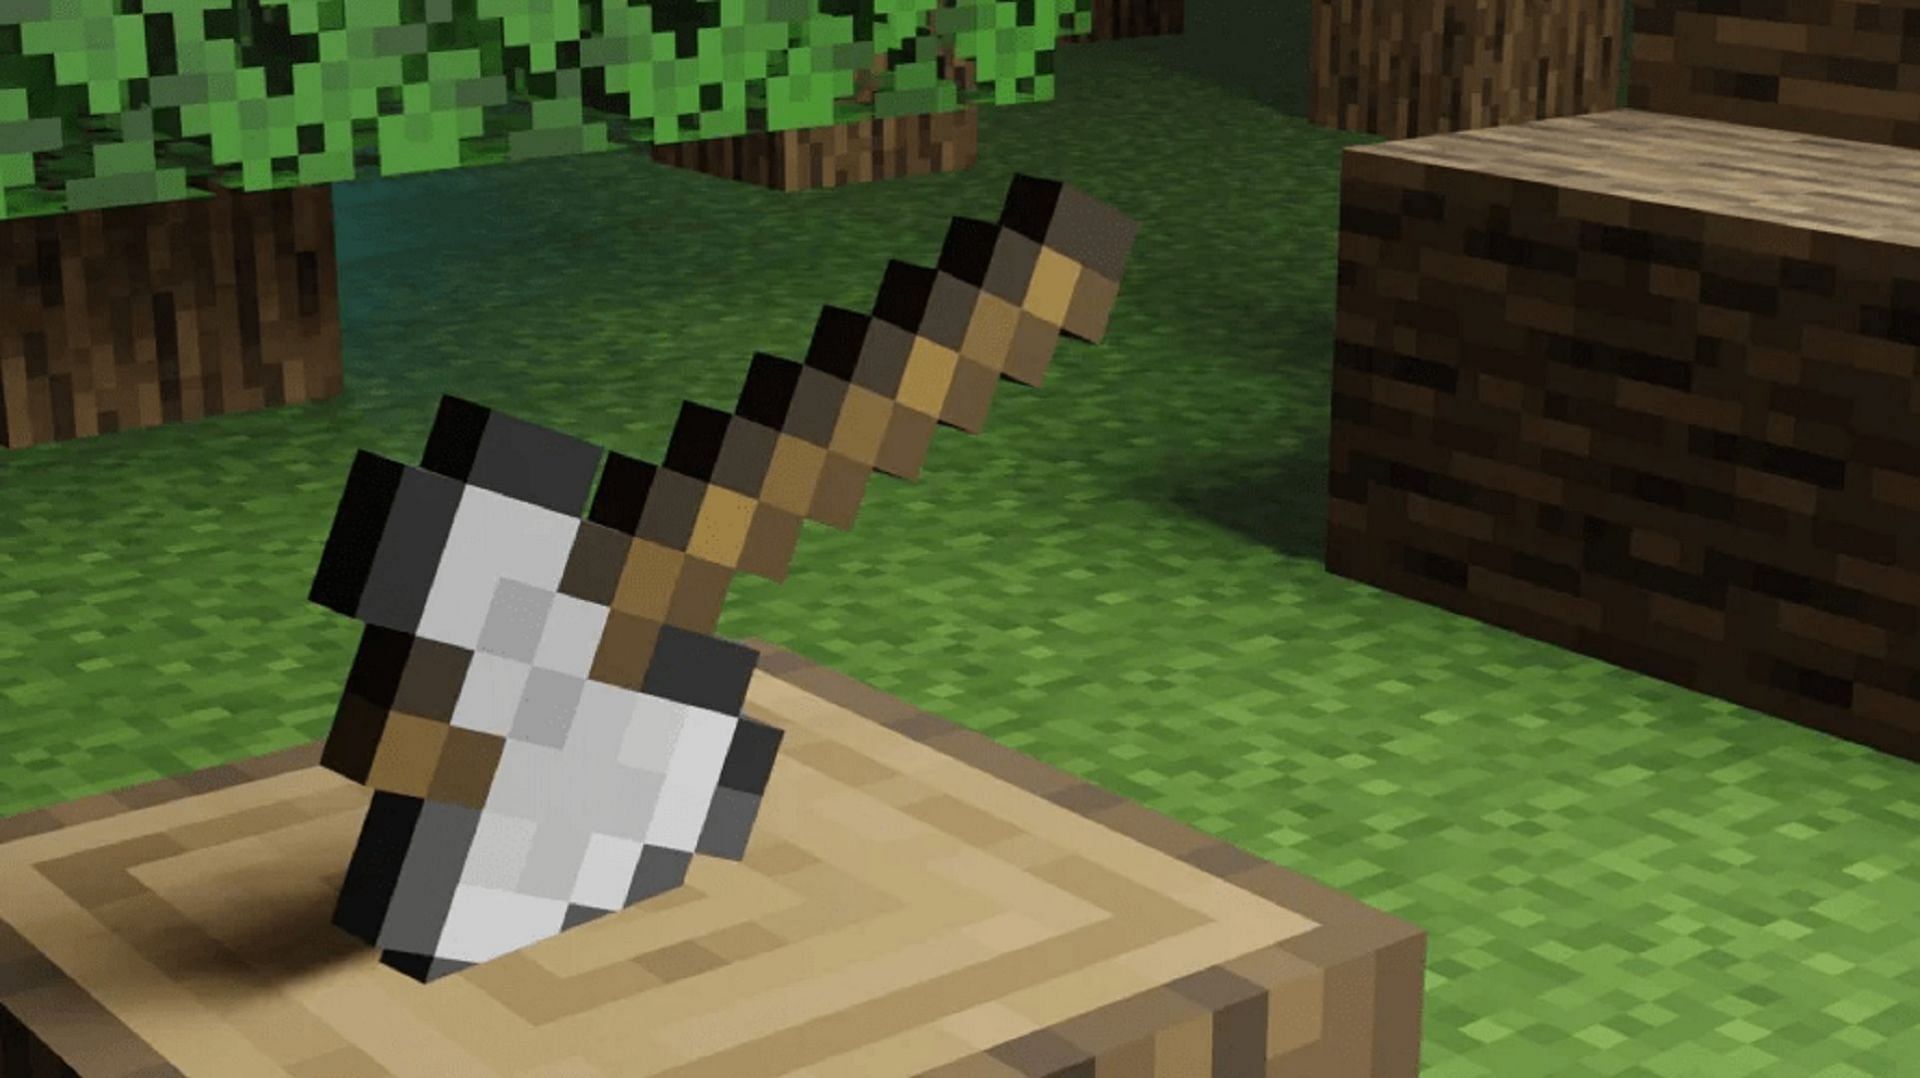 Axes are excellent at felling trees as well as hostile mobs in Minecraft (Image via Mojang)